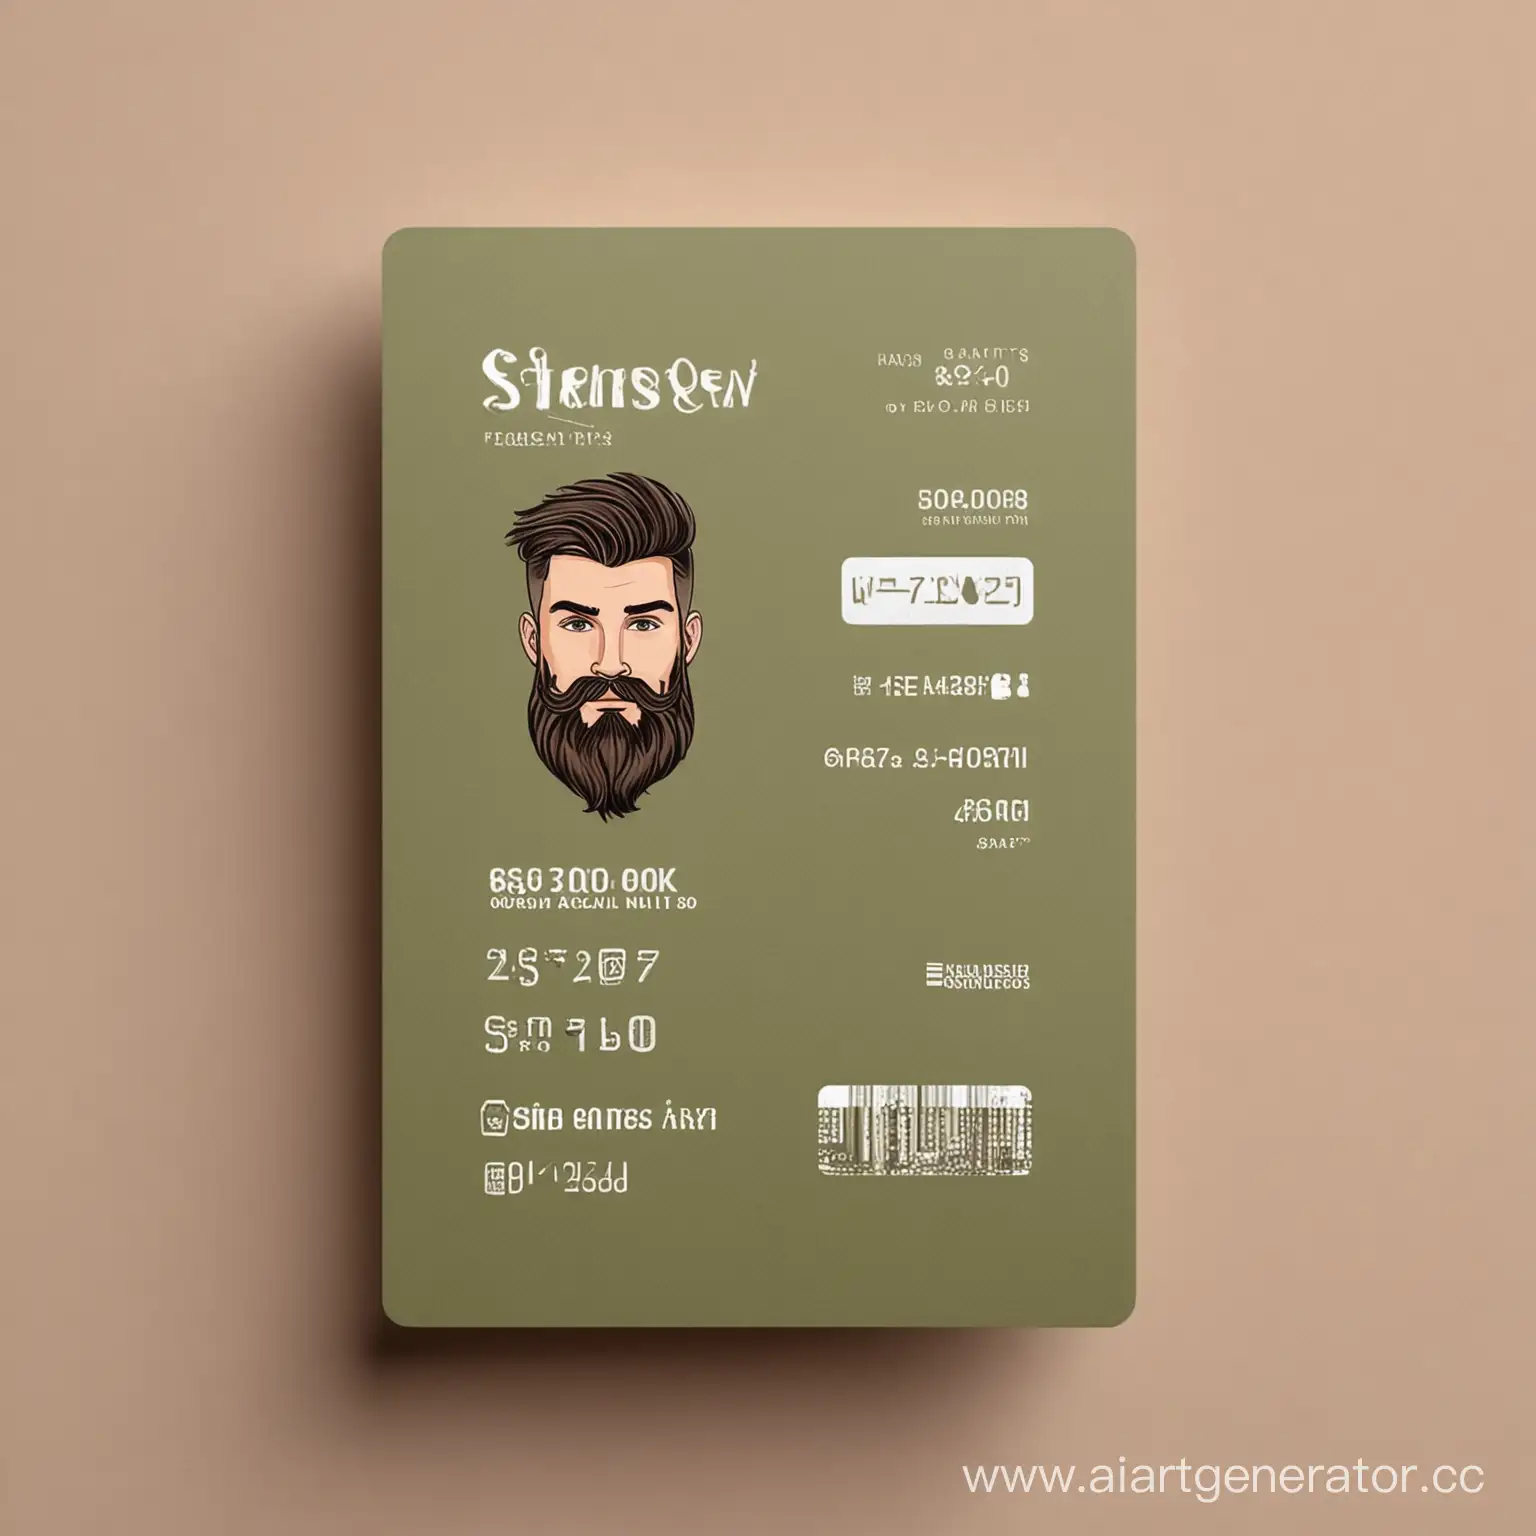 Khaki-Aesthetic-Haircut-and-Beard-Services-Price-List-on-Credit-Card-Style